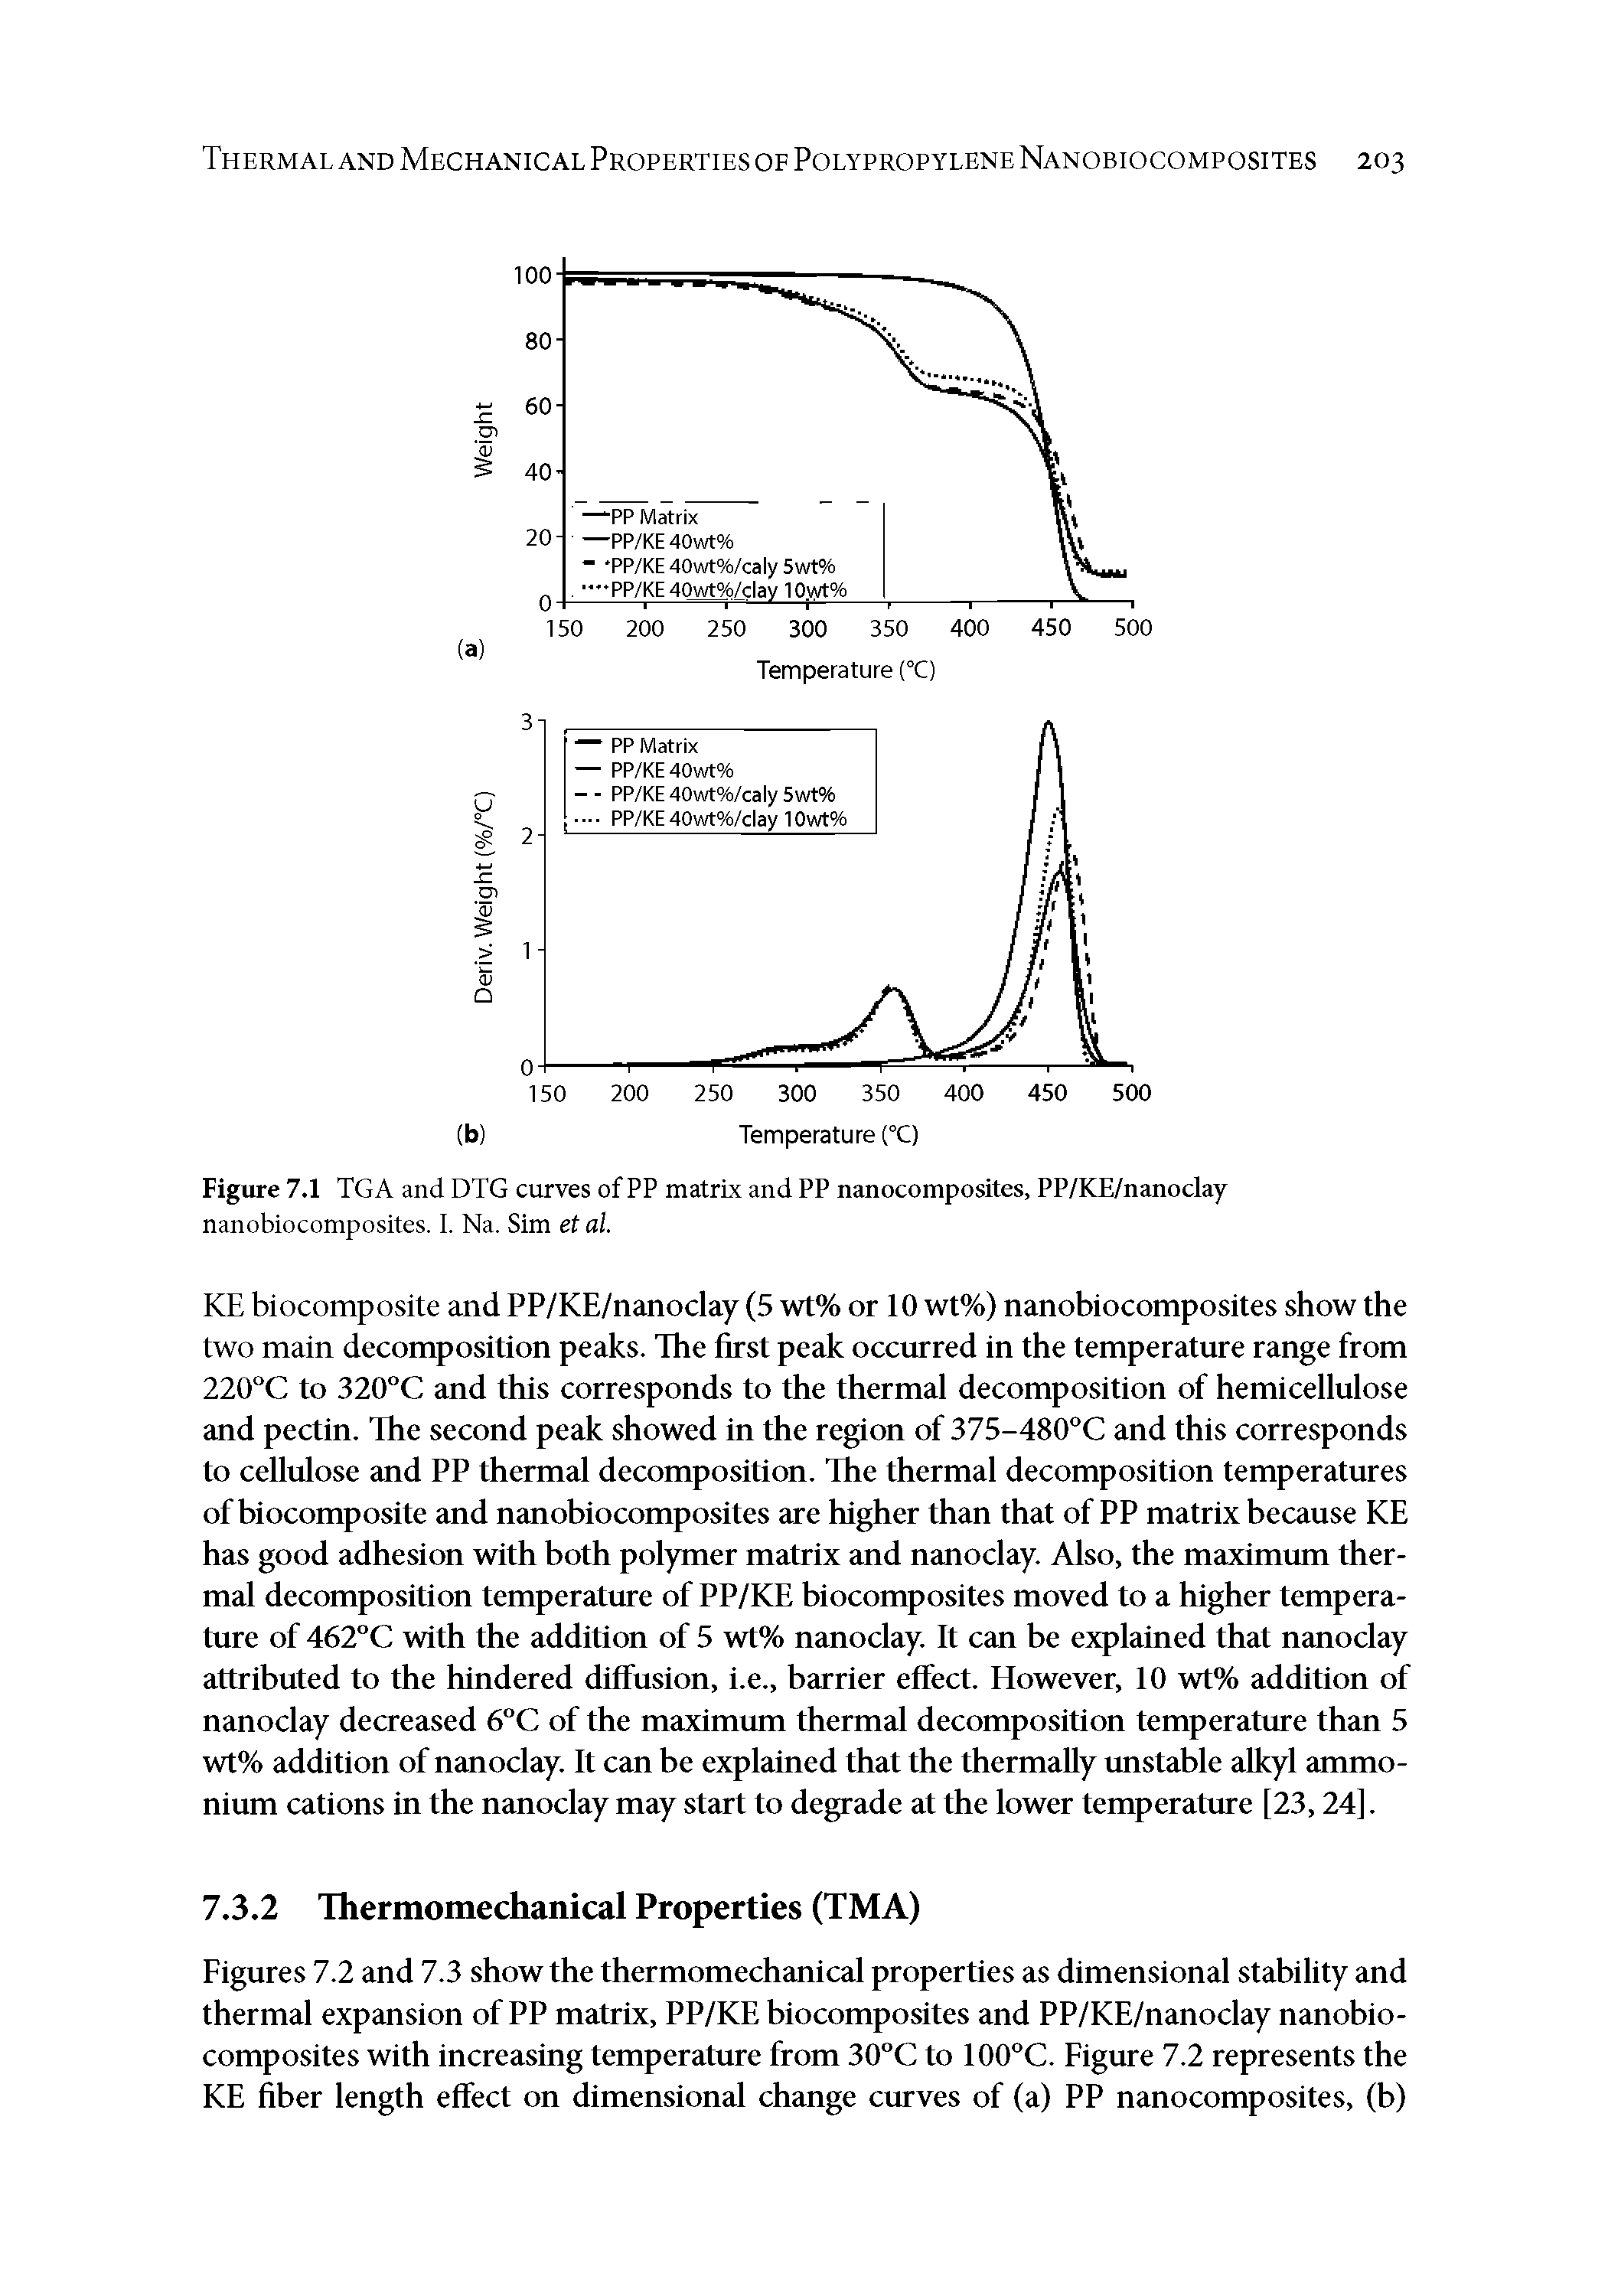 Figures 7.2 and 7.3 show the thermomechanical properties as dimensional stability and thermal expansion of PP matrix, PP/KE biocomposites and PP/KE/nanoclay nanobiocomposites with increasing temperatme from 30 C to 100°C. Figure 7.2 represents the KE fiber length effect on dimensional change curves of (a) PP nanocomposites, (b)...